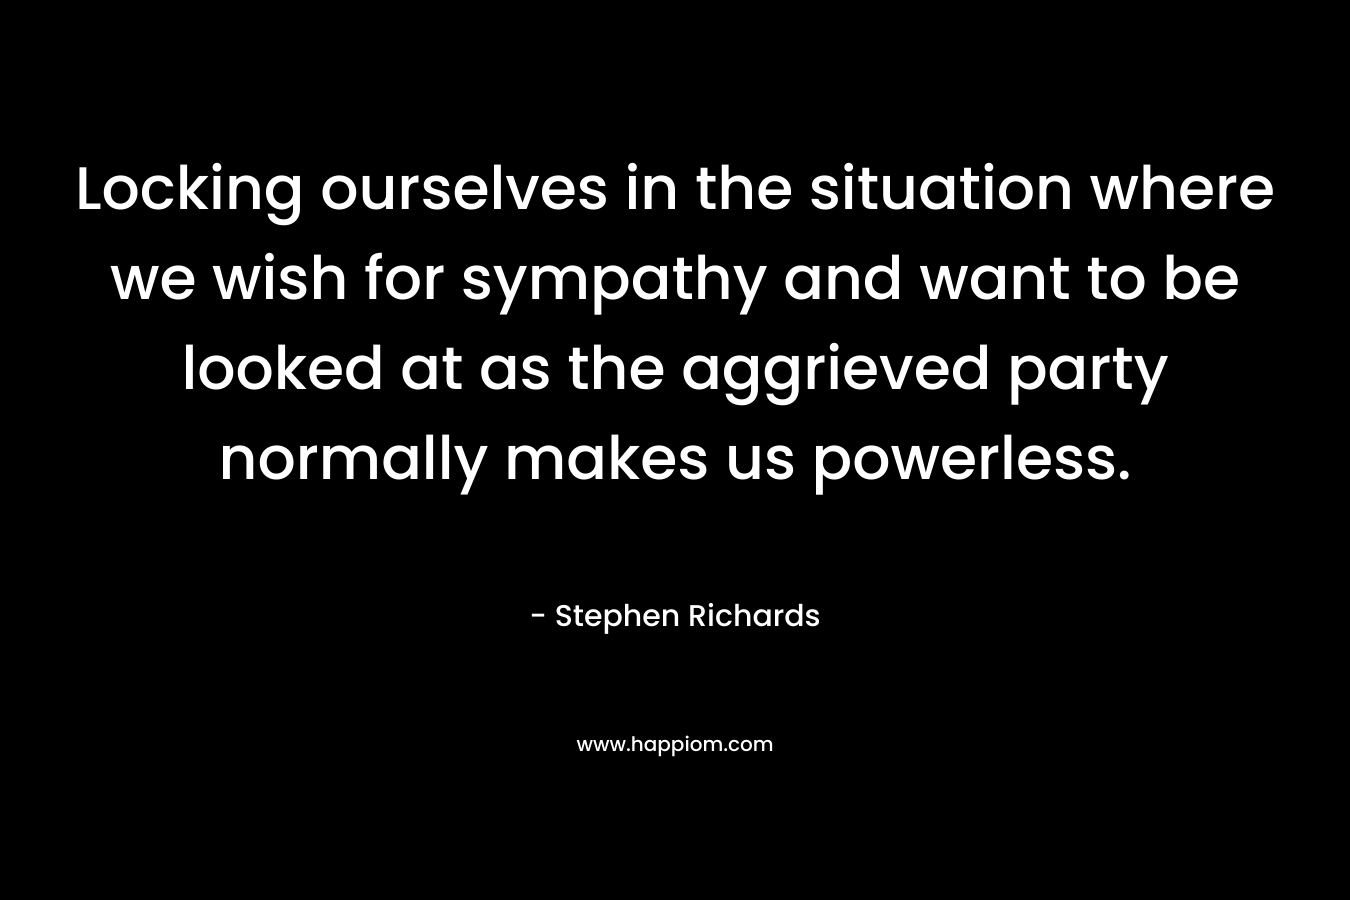 Locking ourselves in the situation where we wish for sympathy and want to be looked at as the aggrieved party normally makes us powerless.